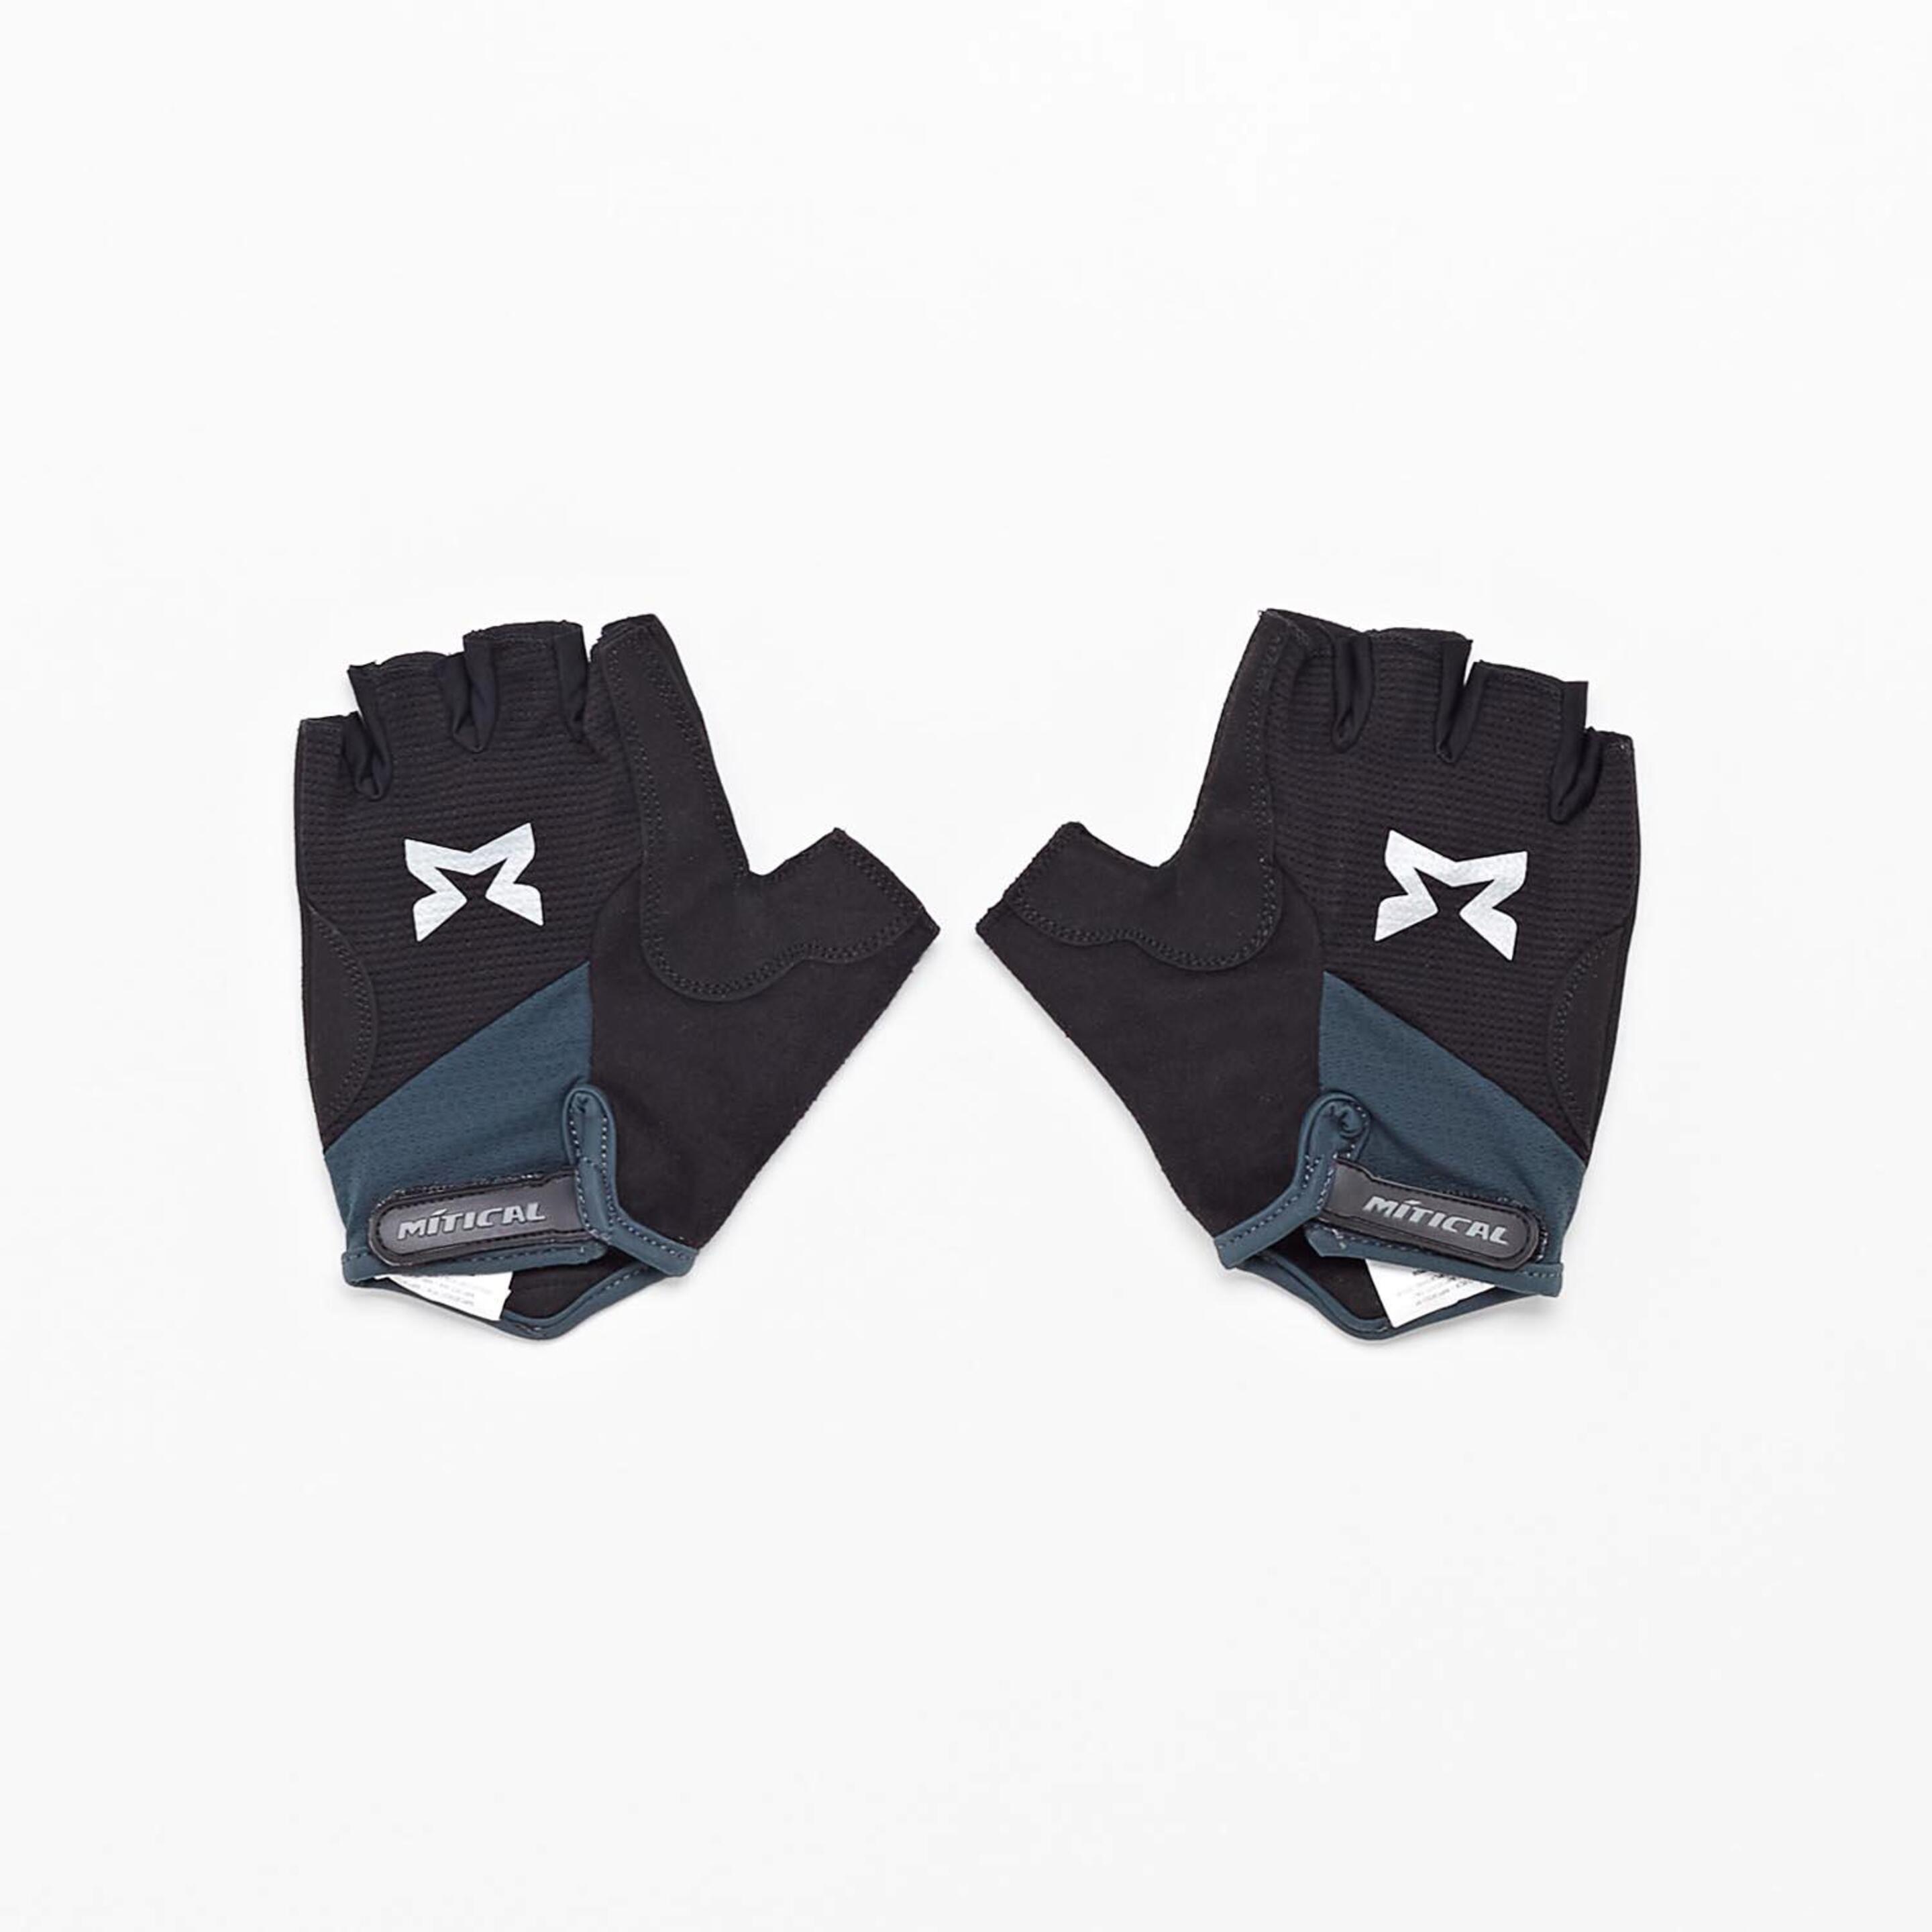 Mítical Speed - gris - Guantes Ciclismo